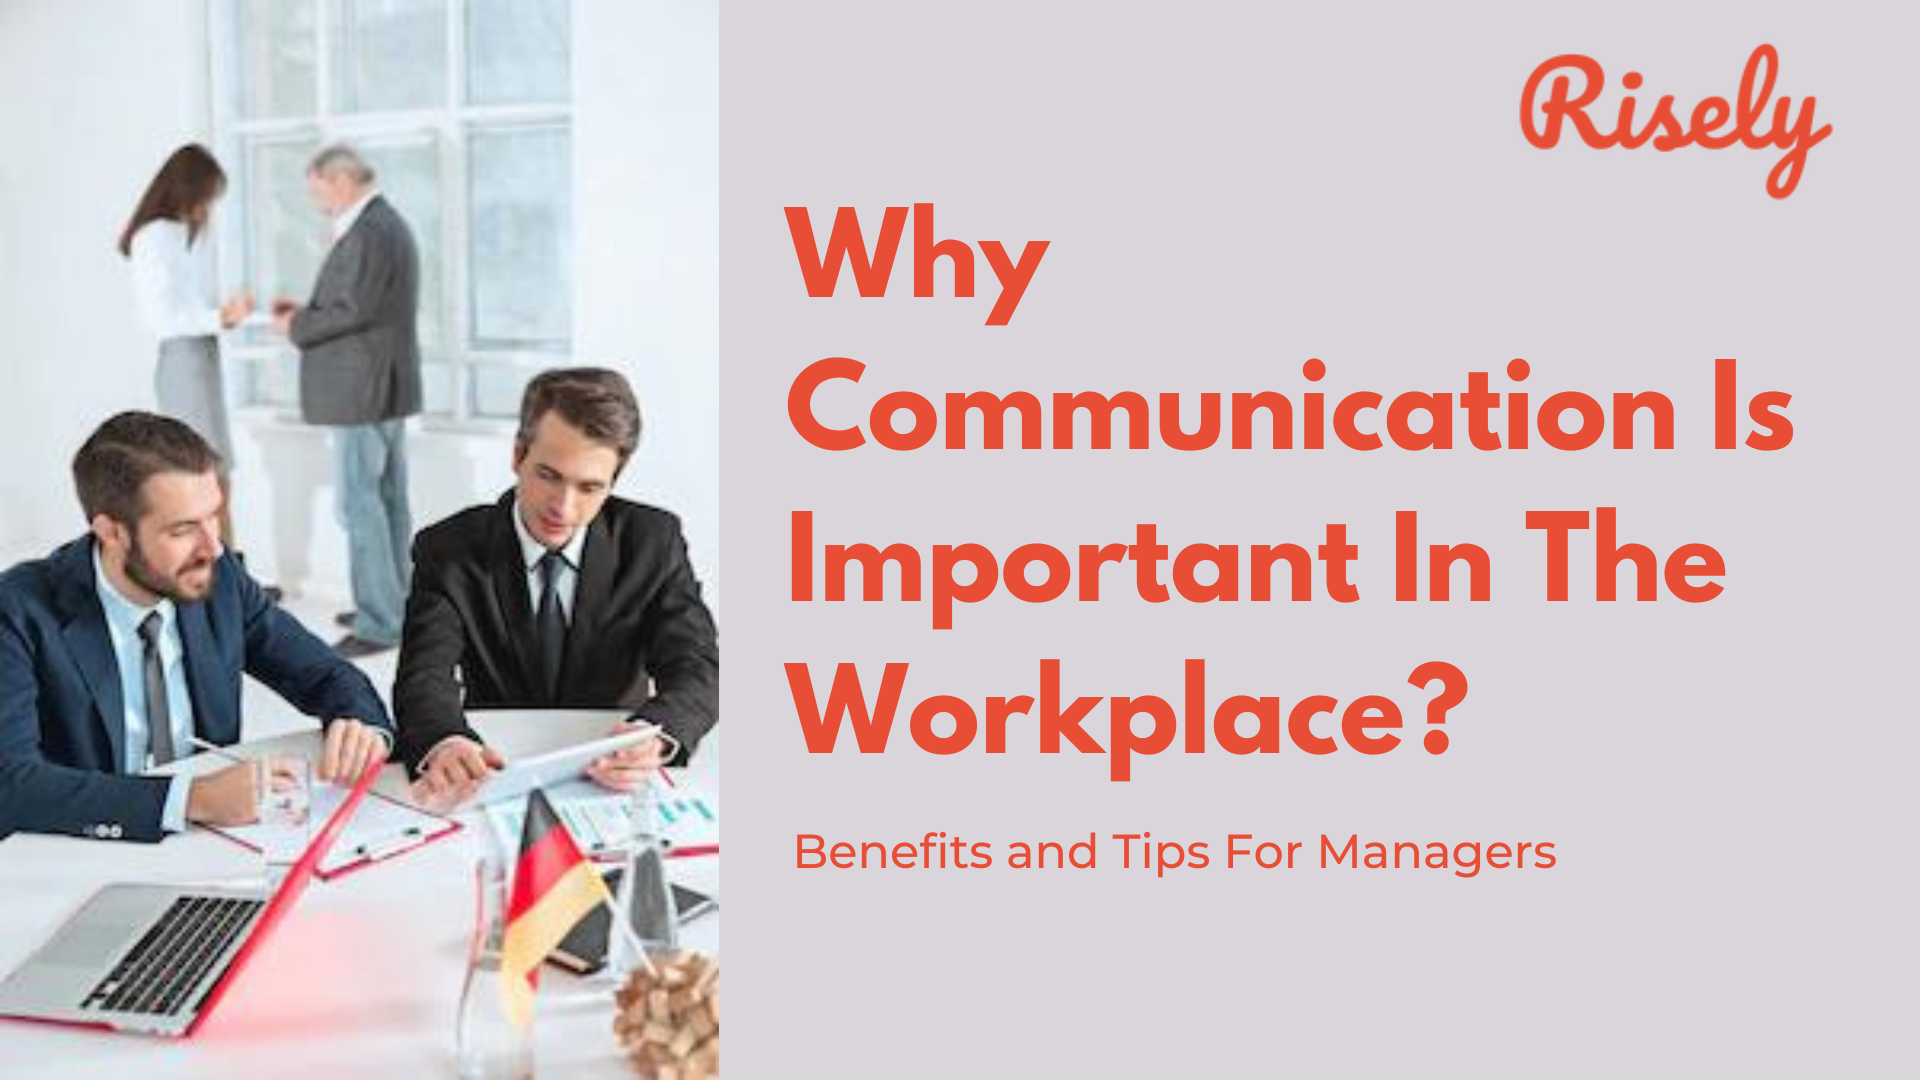 Why Communication Is Important In The Workplace